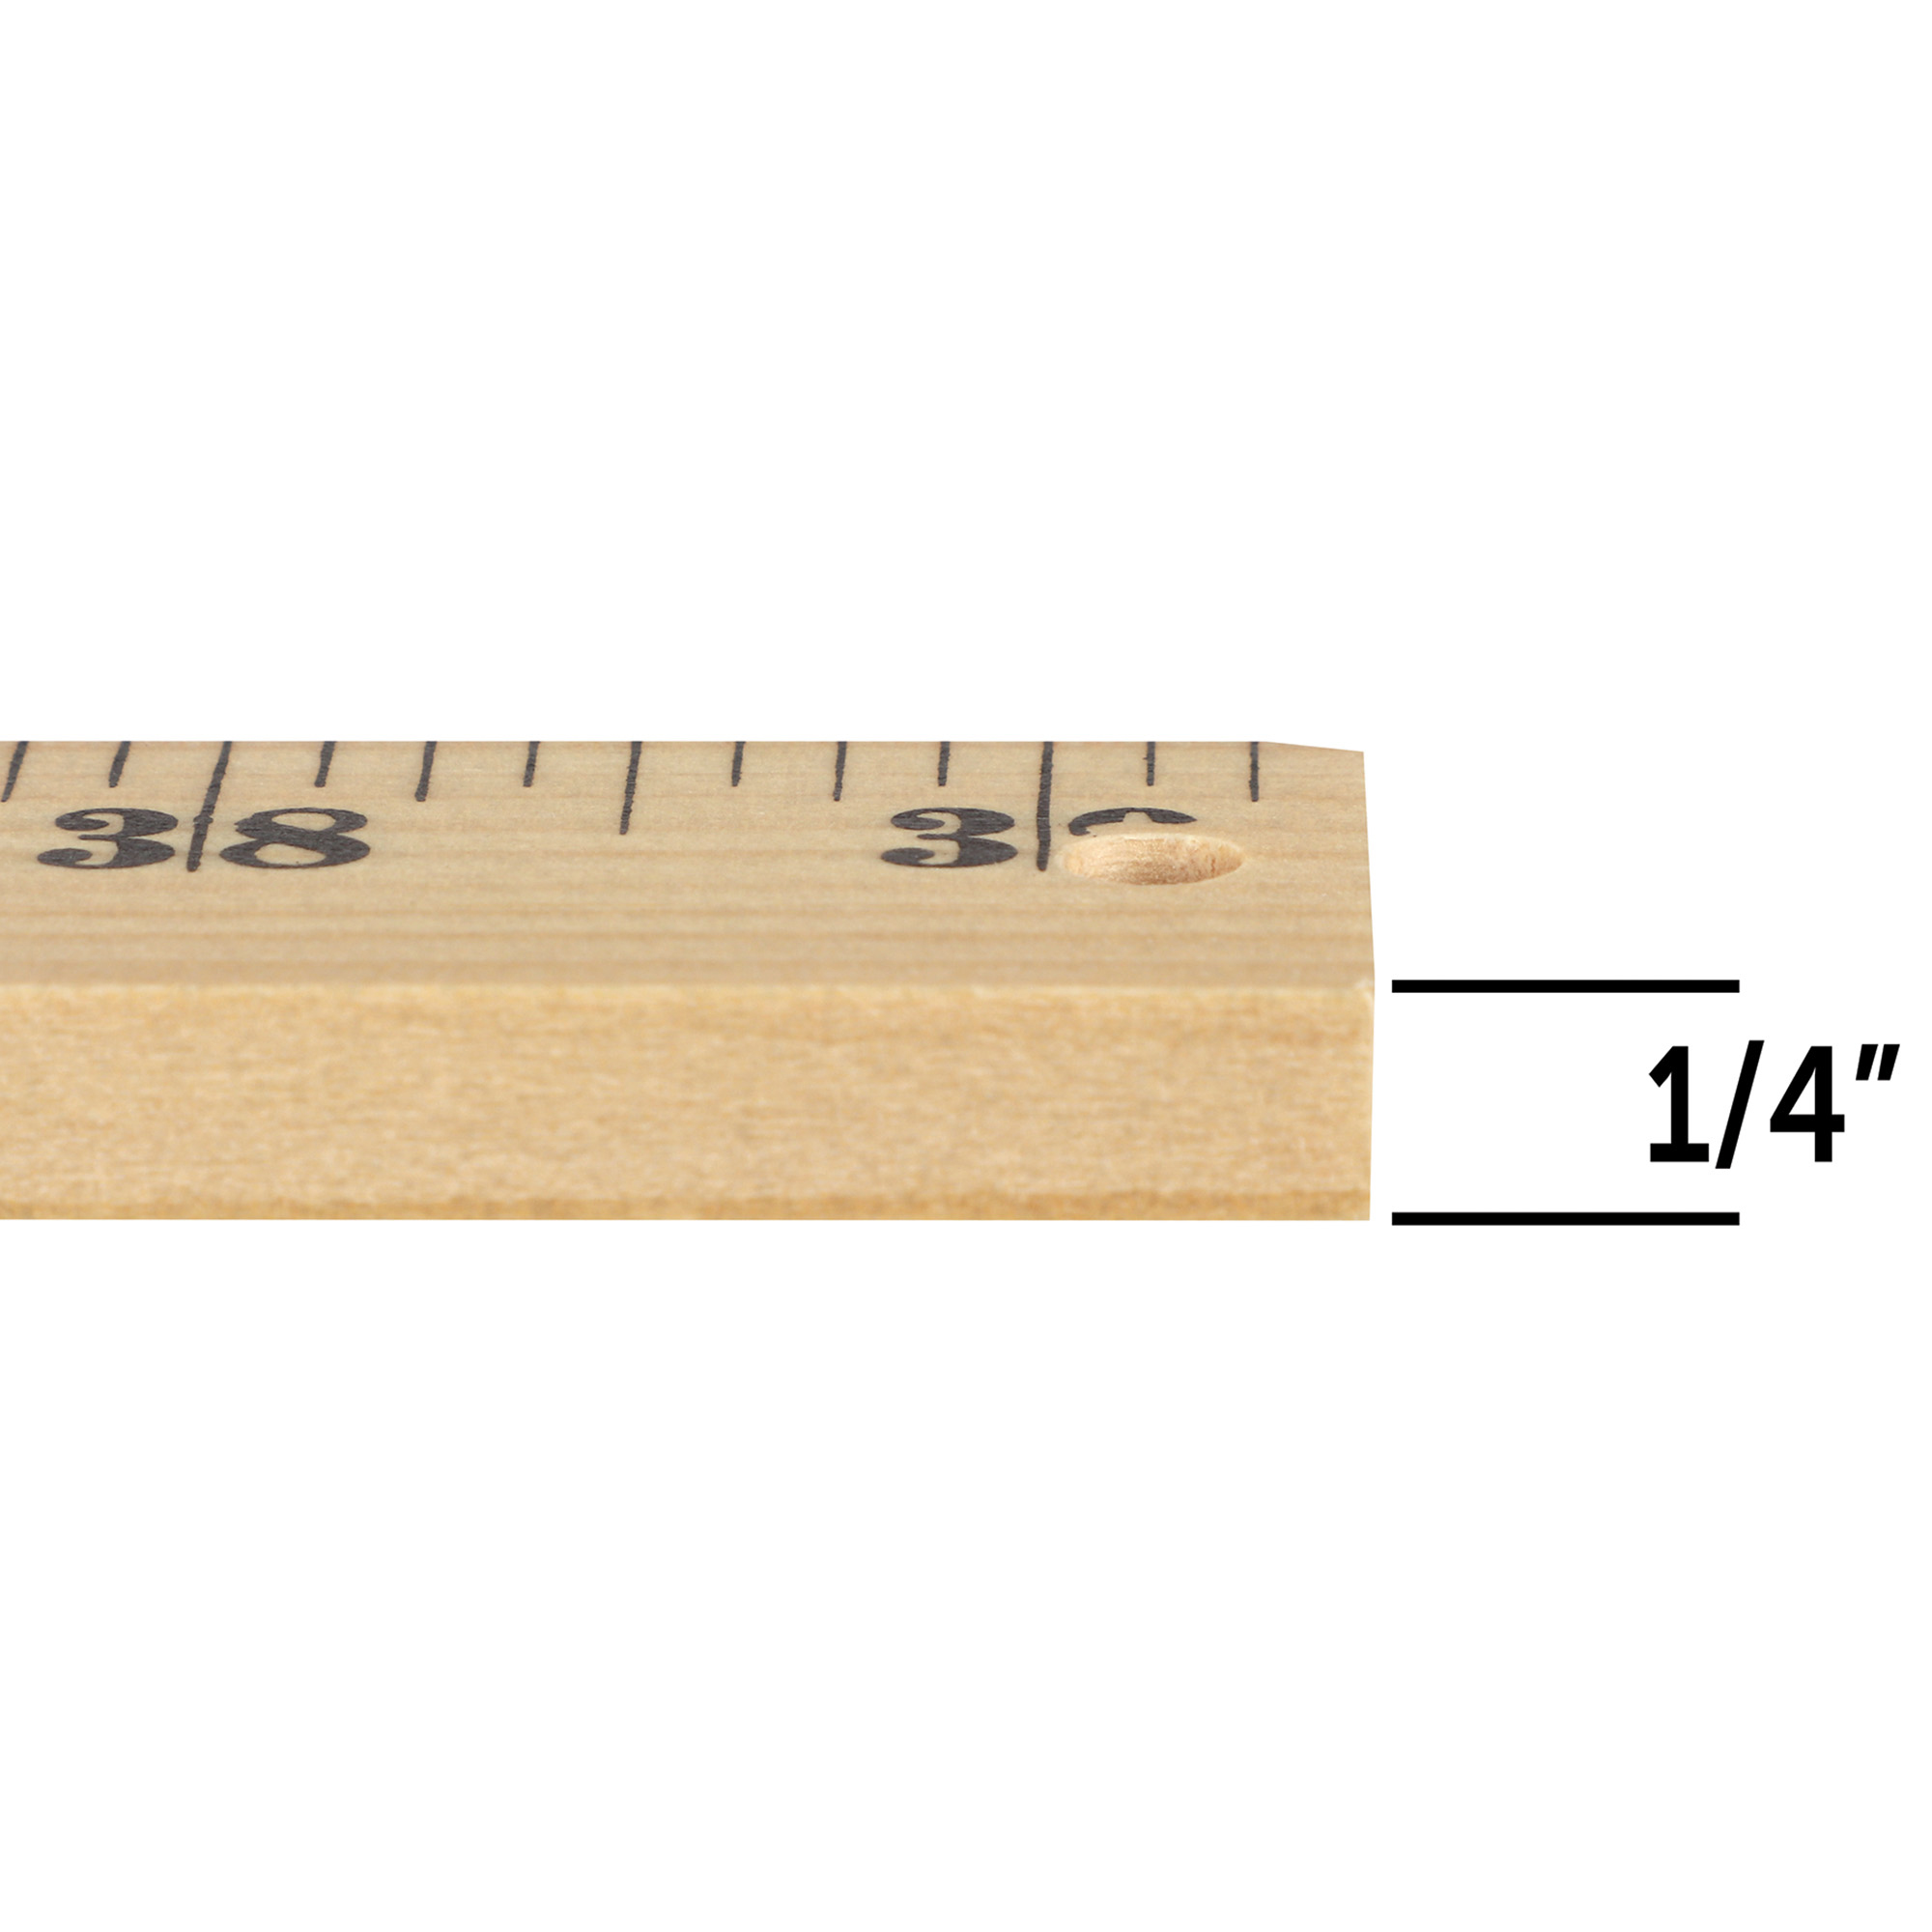 Wooden Meter Stick, Plain Ends, Pack of 3